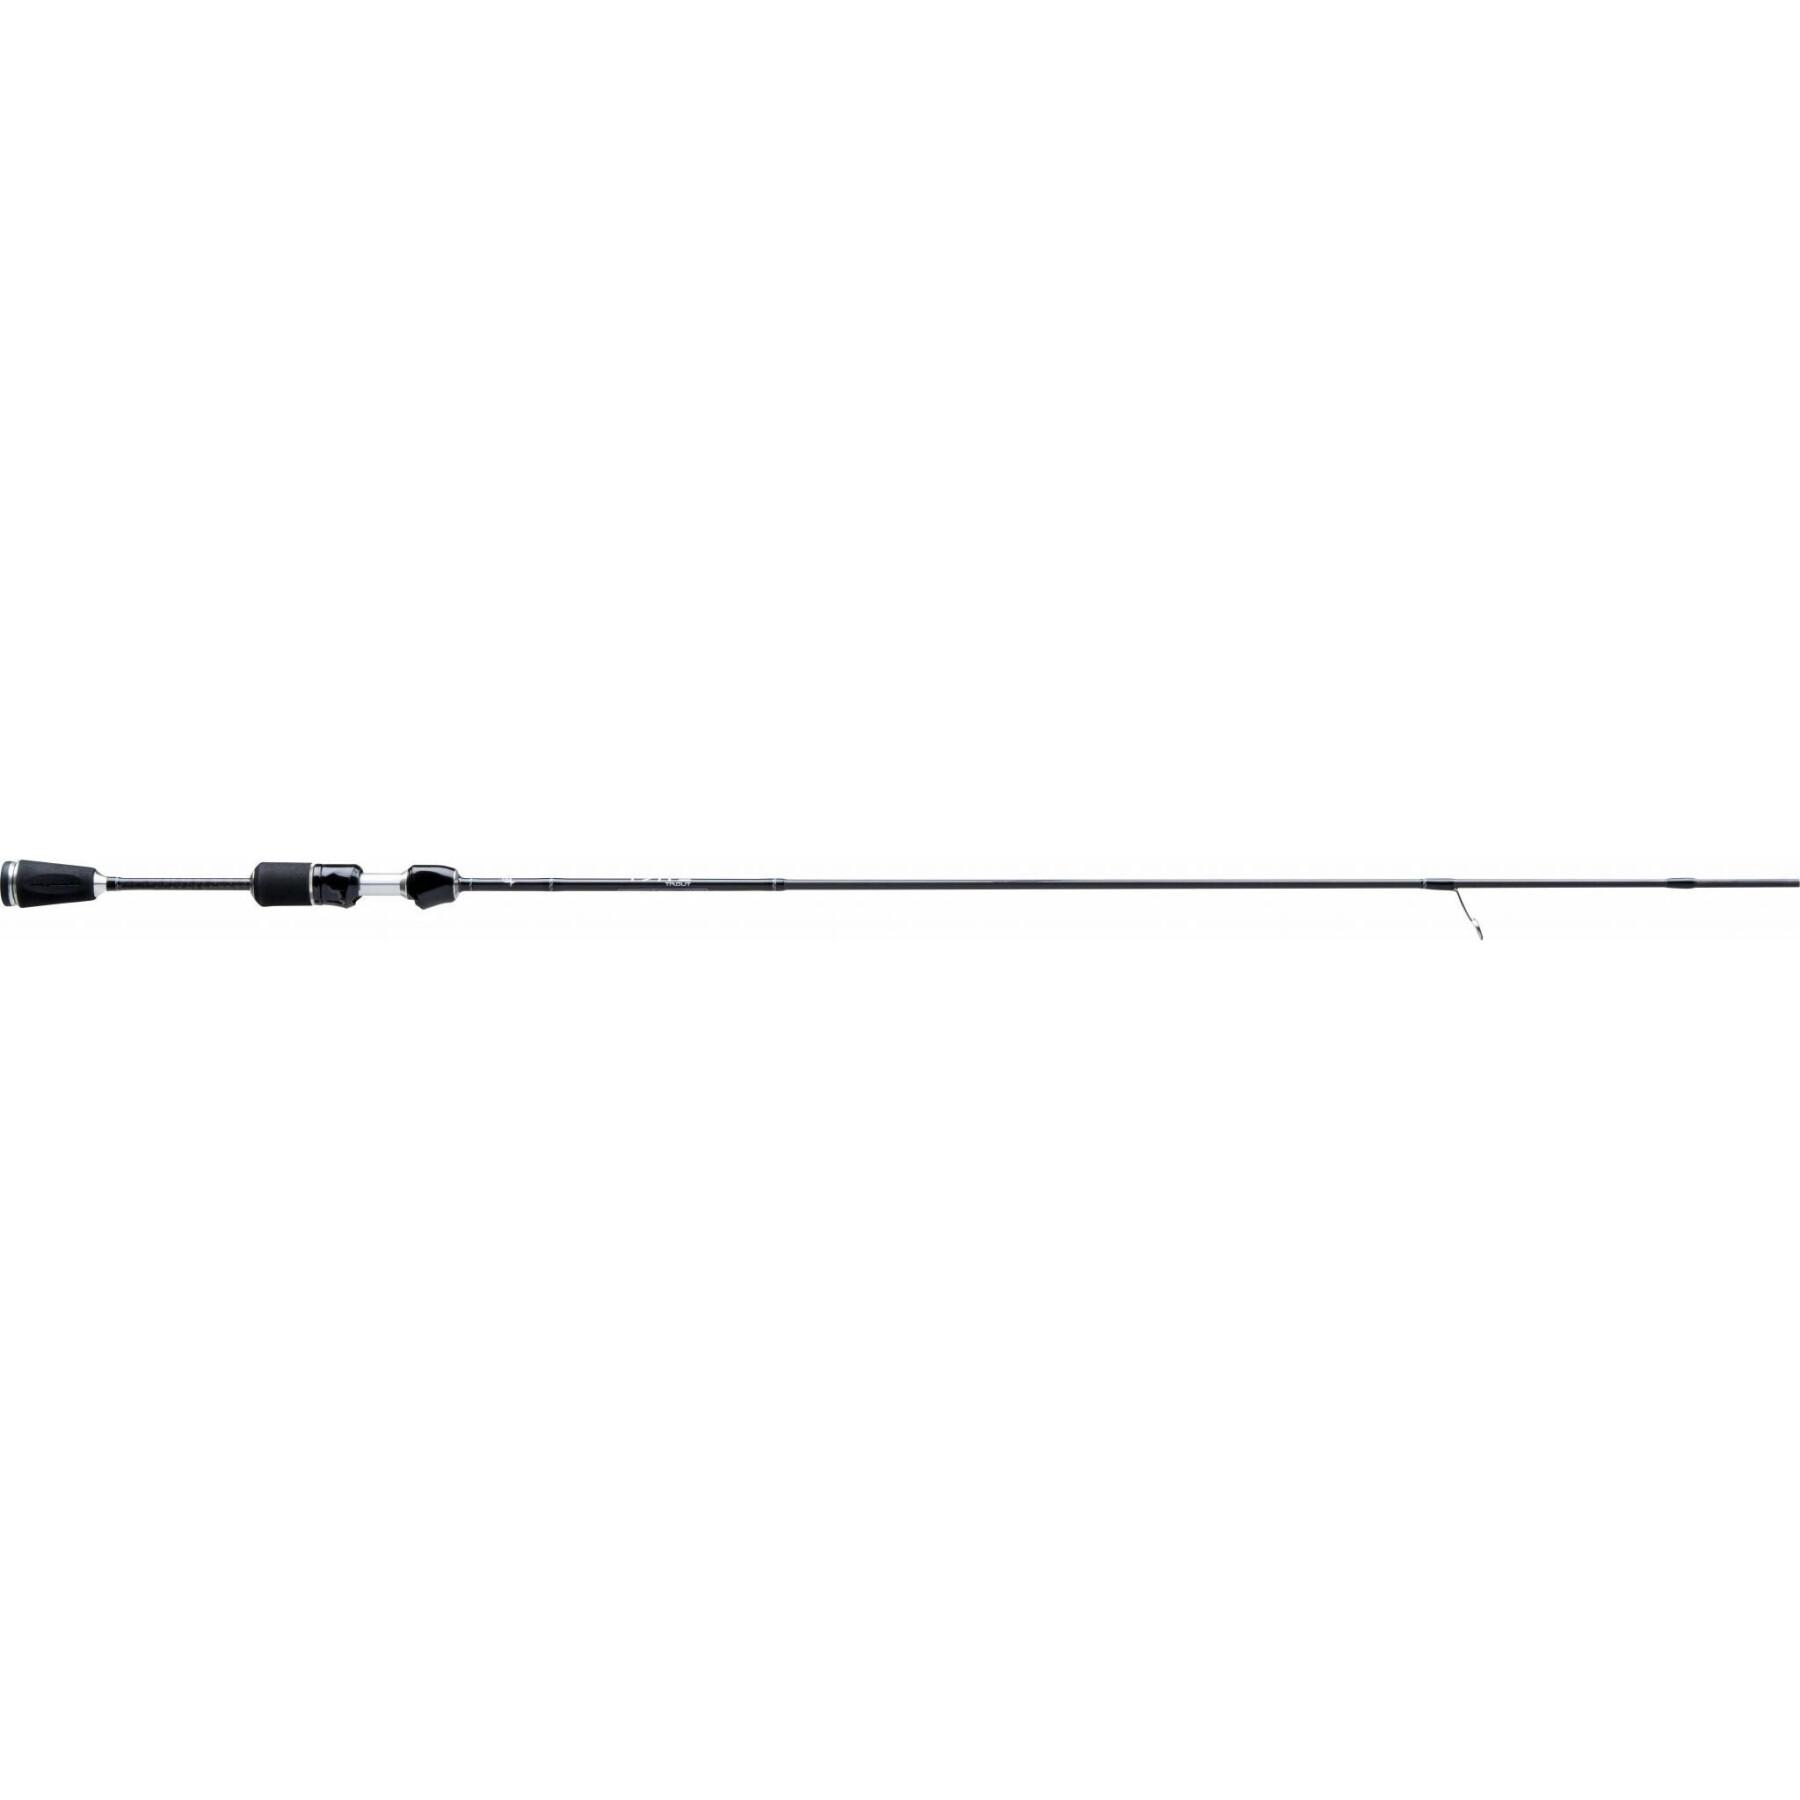 Caña 13 Fishing Fate Trout sp 2m 1-4g